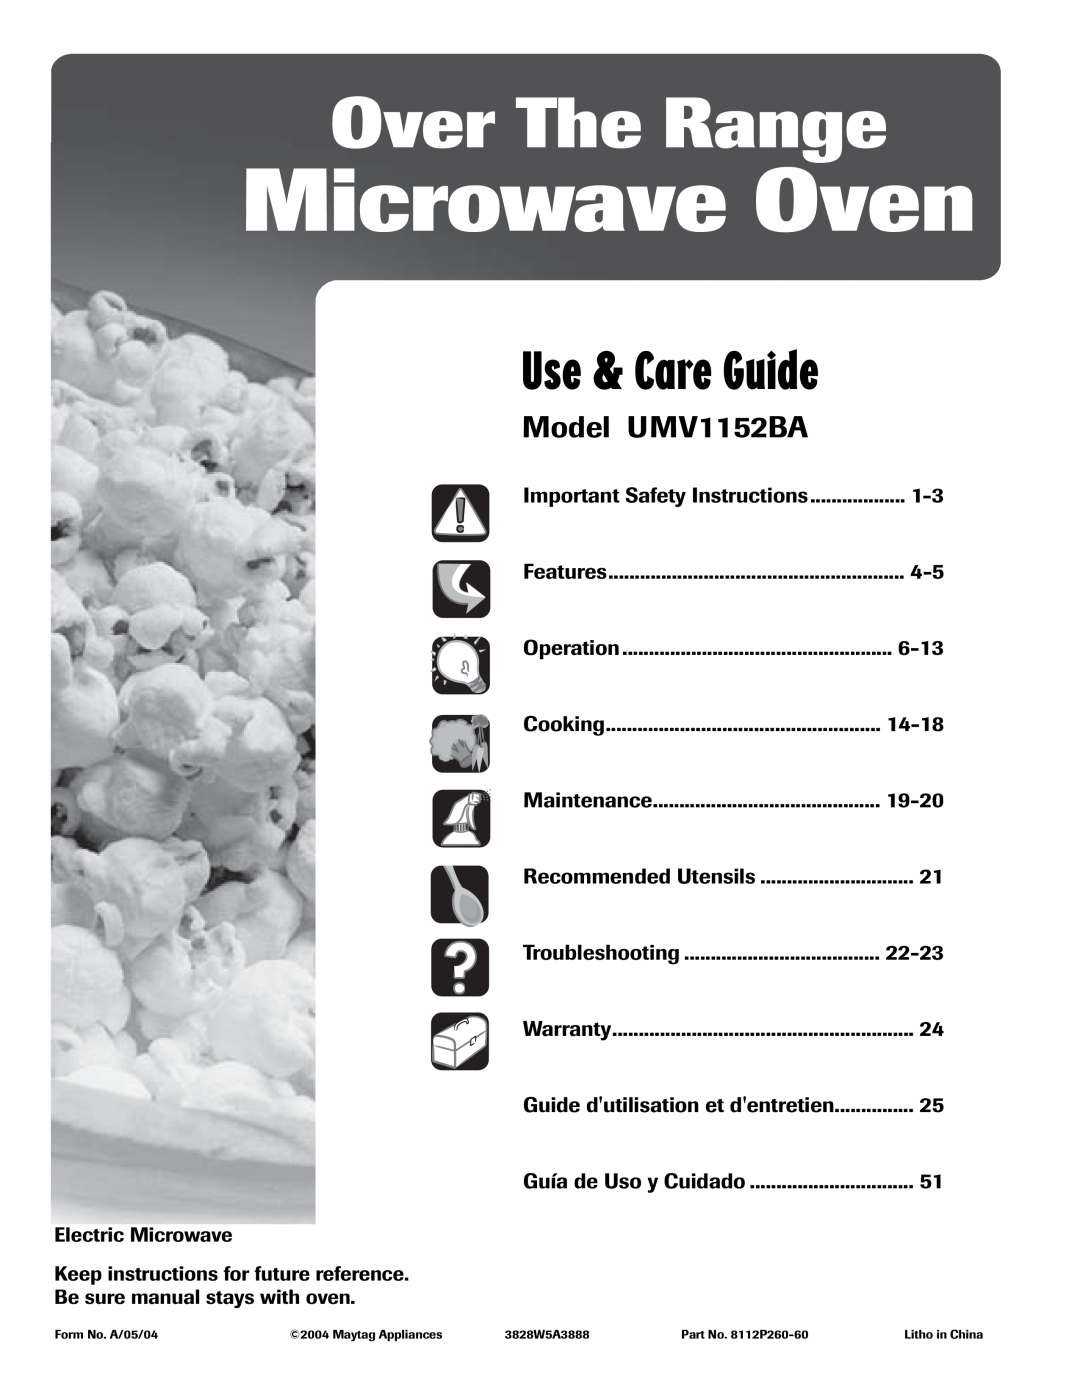 Maytag important safety instructions Over The Range, Model UMV1152BA, Microwave Oven, Use & Care Guide 